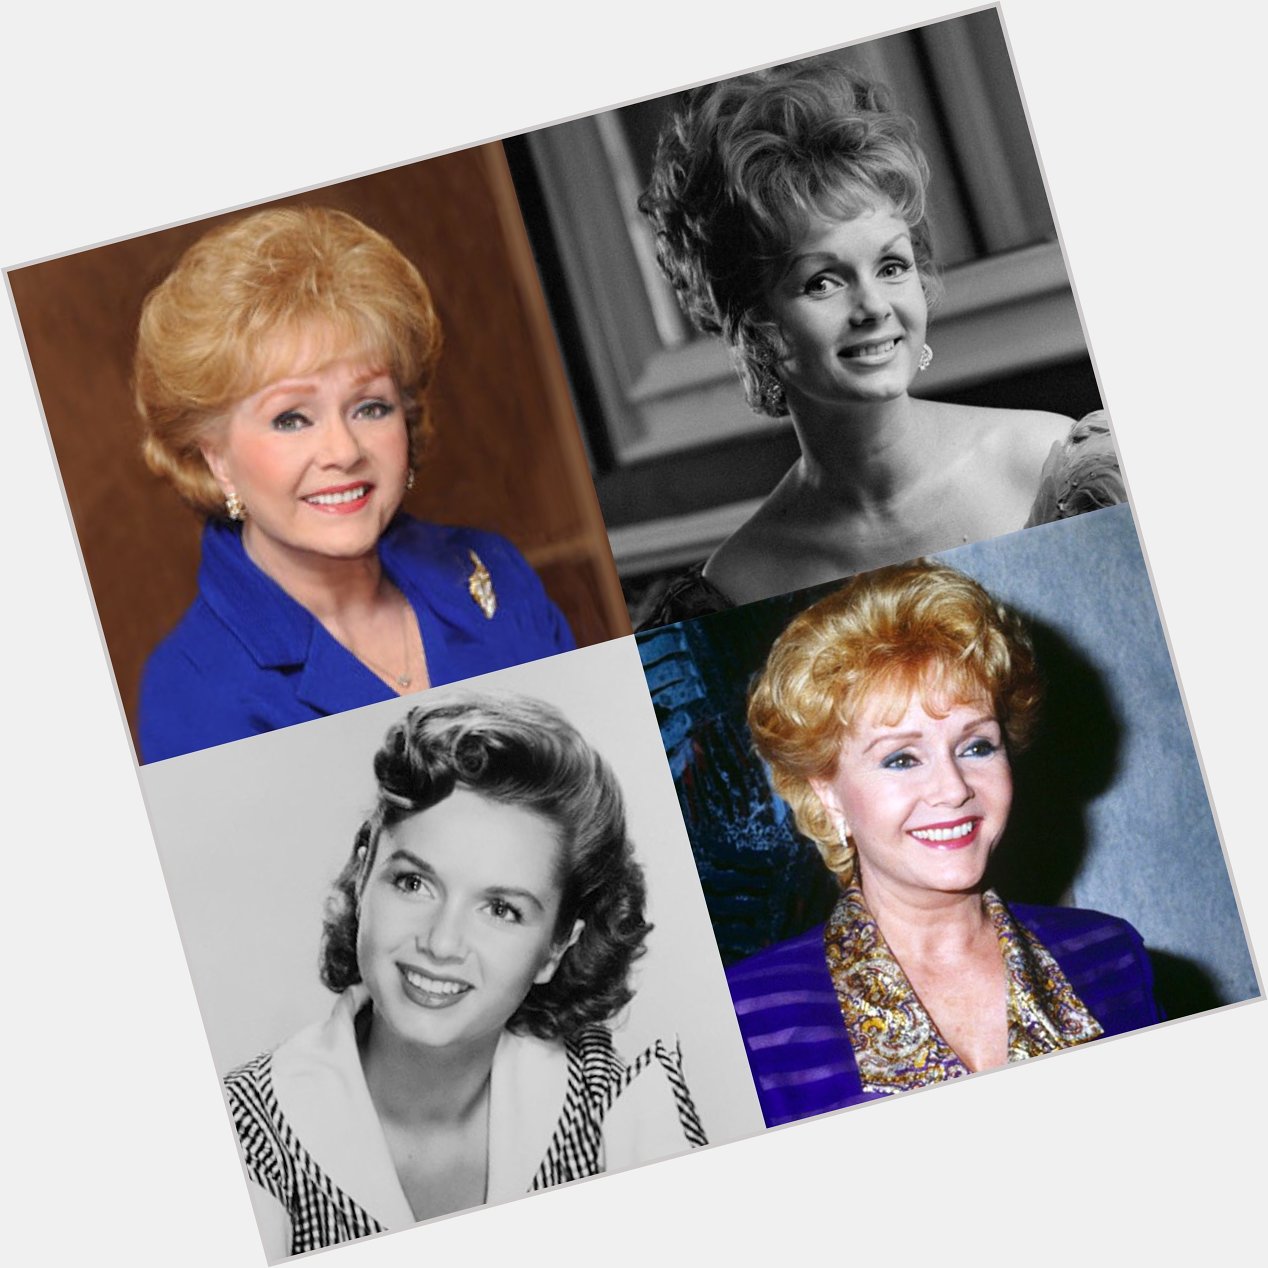 Happy 86 birthday to Debbie Reynolds up in heaven. May she Rest In Peace.  